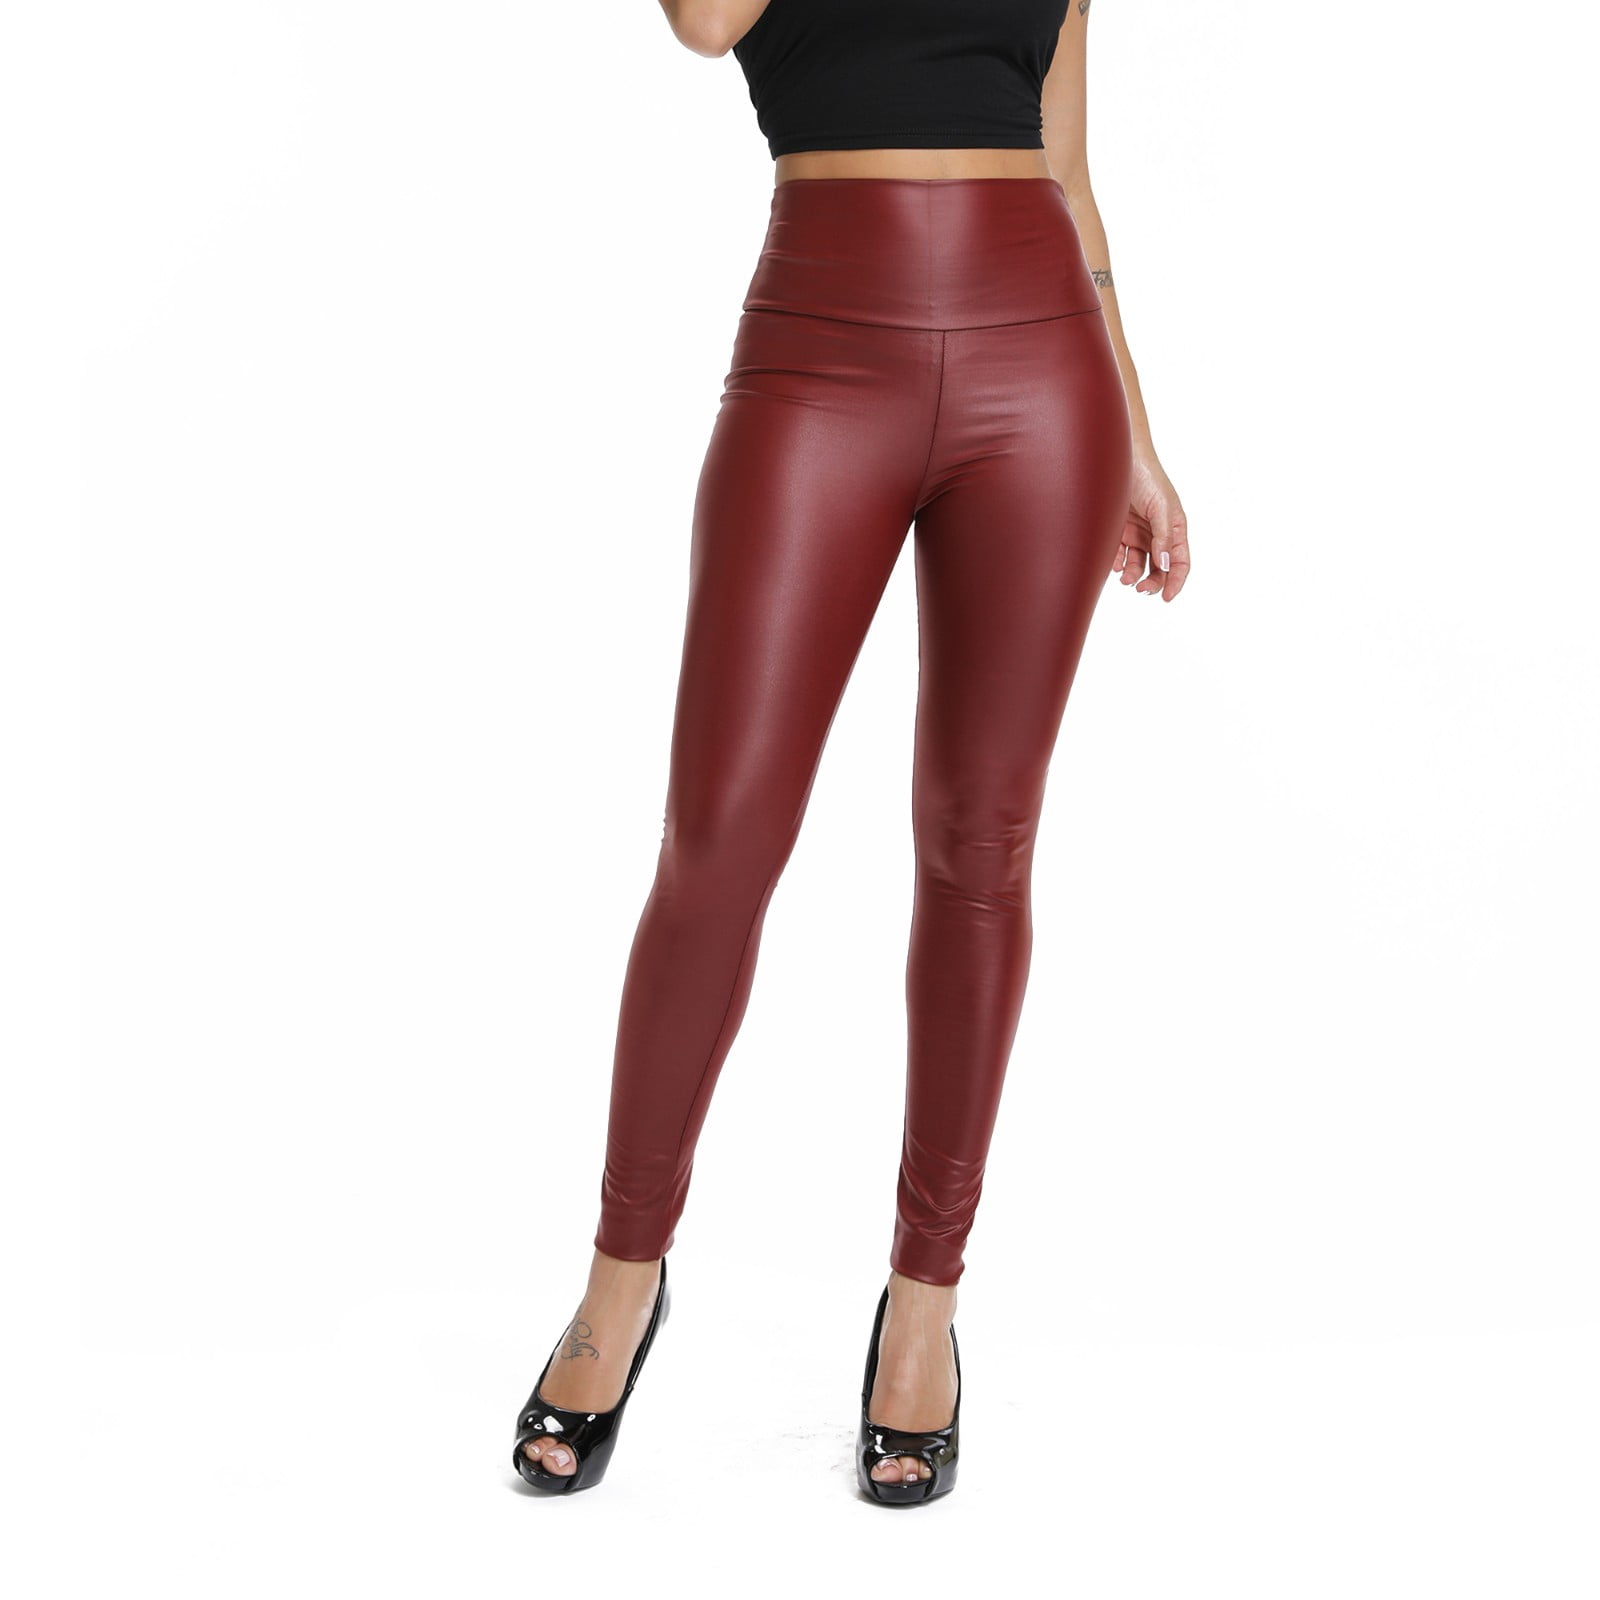 Fittoo Fittoo Sexy Women S Stretchy Faux Leather Leggings High